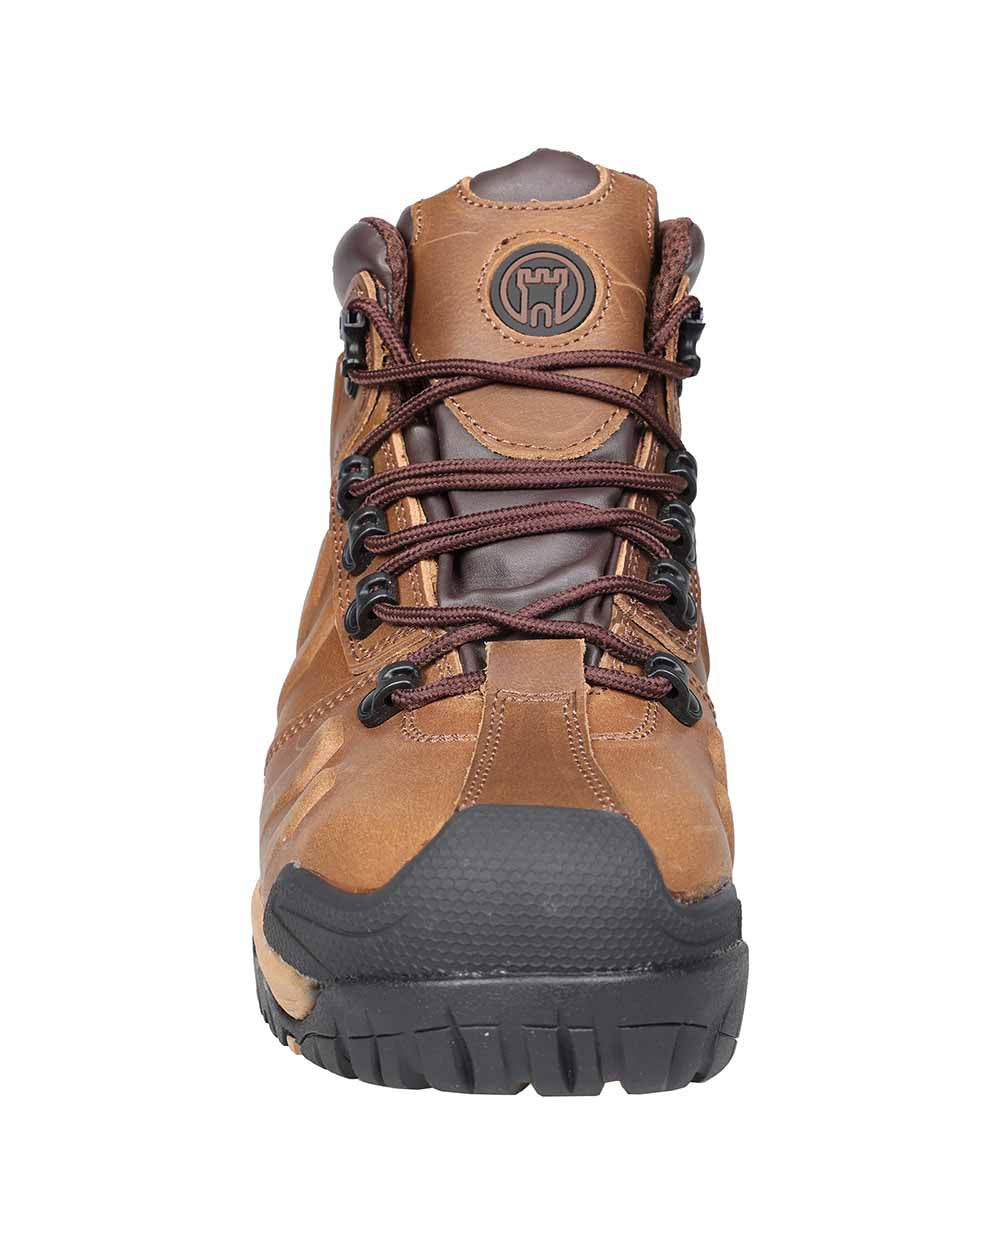 Brown Coloured Fort Deben Waterproof Safety Boot On A White Background 